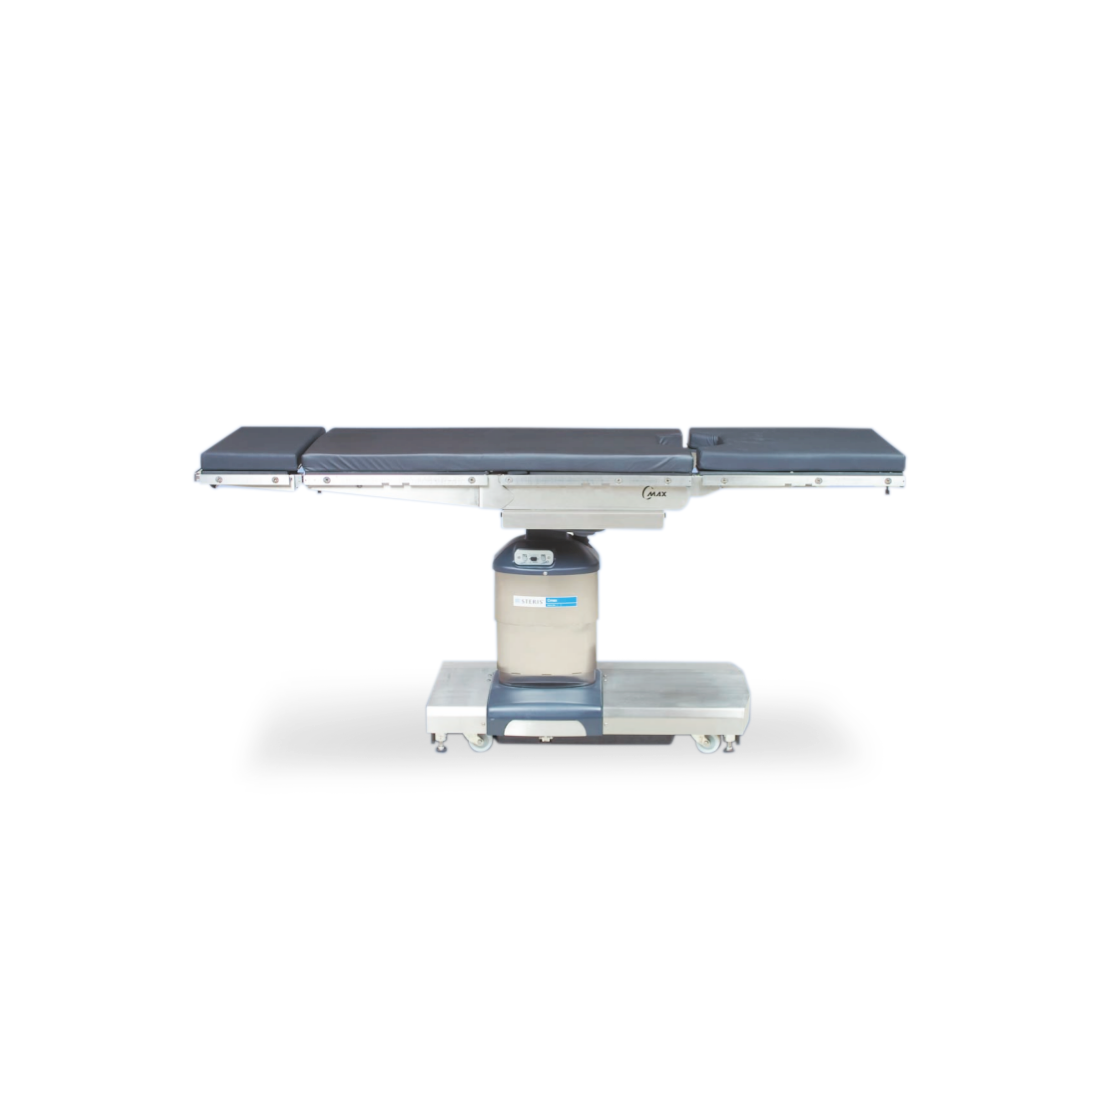 Steris Amsco C-Max 4085 General Surgical Table